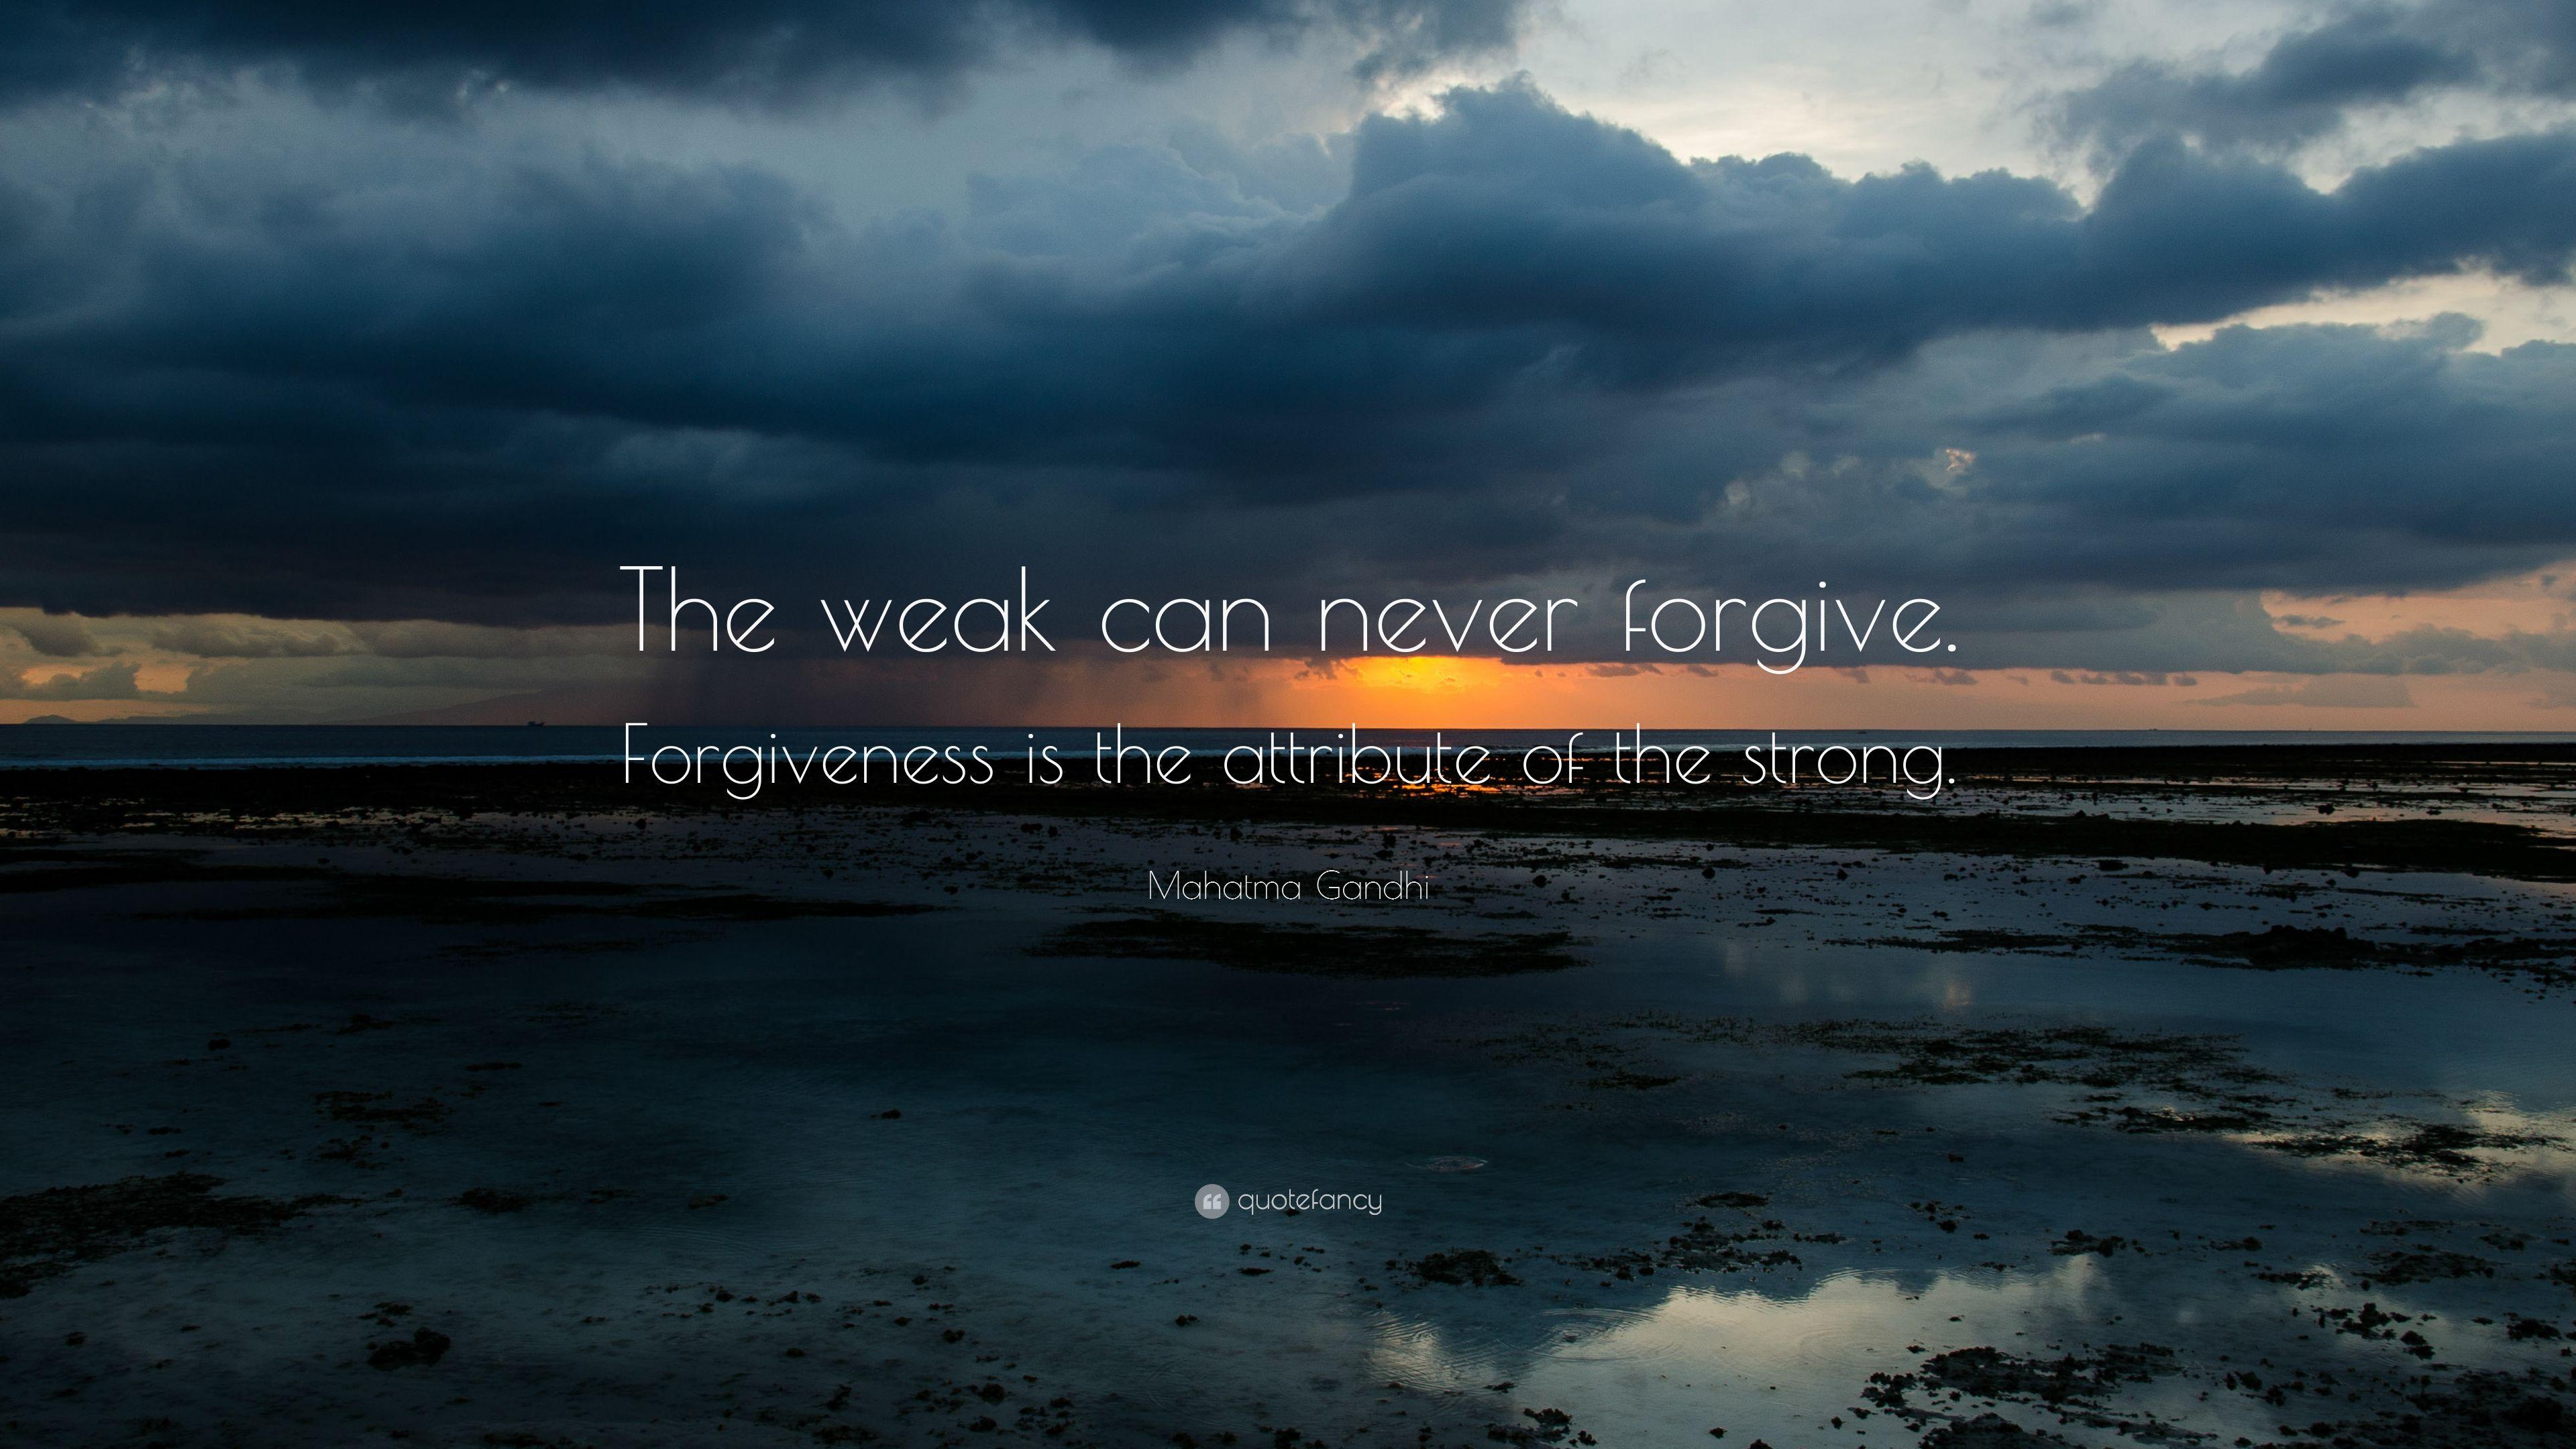 Mahatma Gandhi Quote: “The weak can never forgive. Forgiveness is